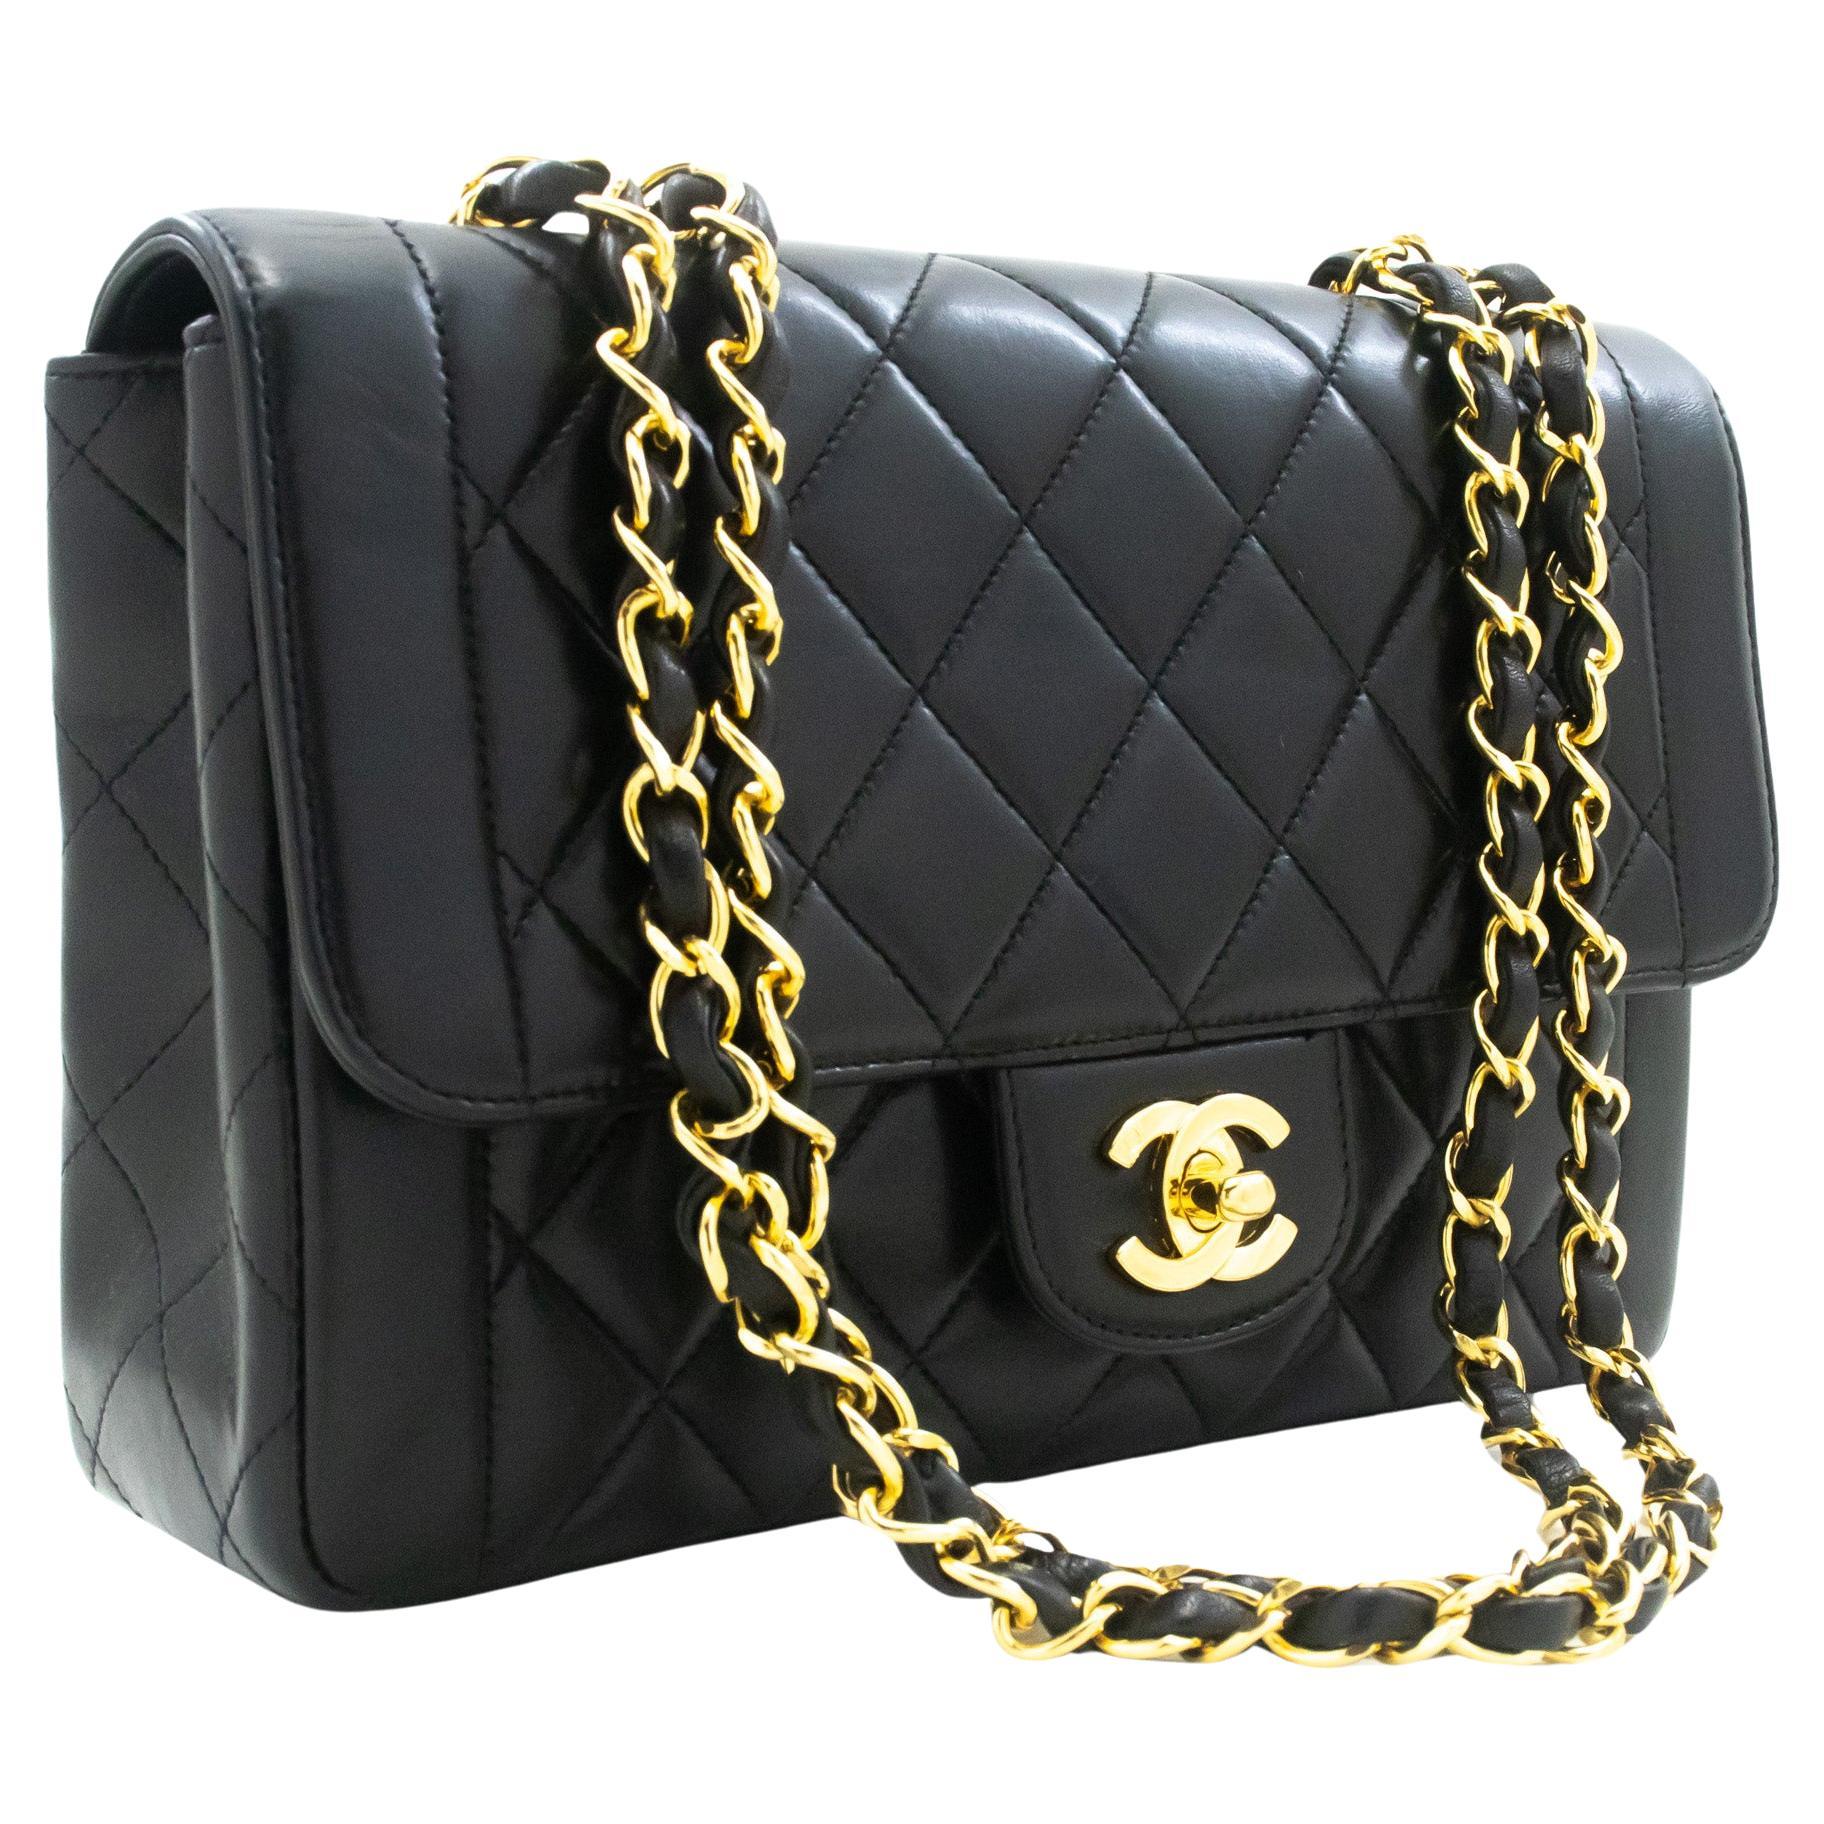 CHANEL Single Chain Flap Shoulder Bag Black Quilted Purse Lambskin